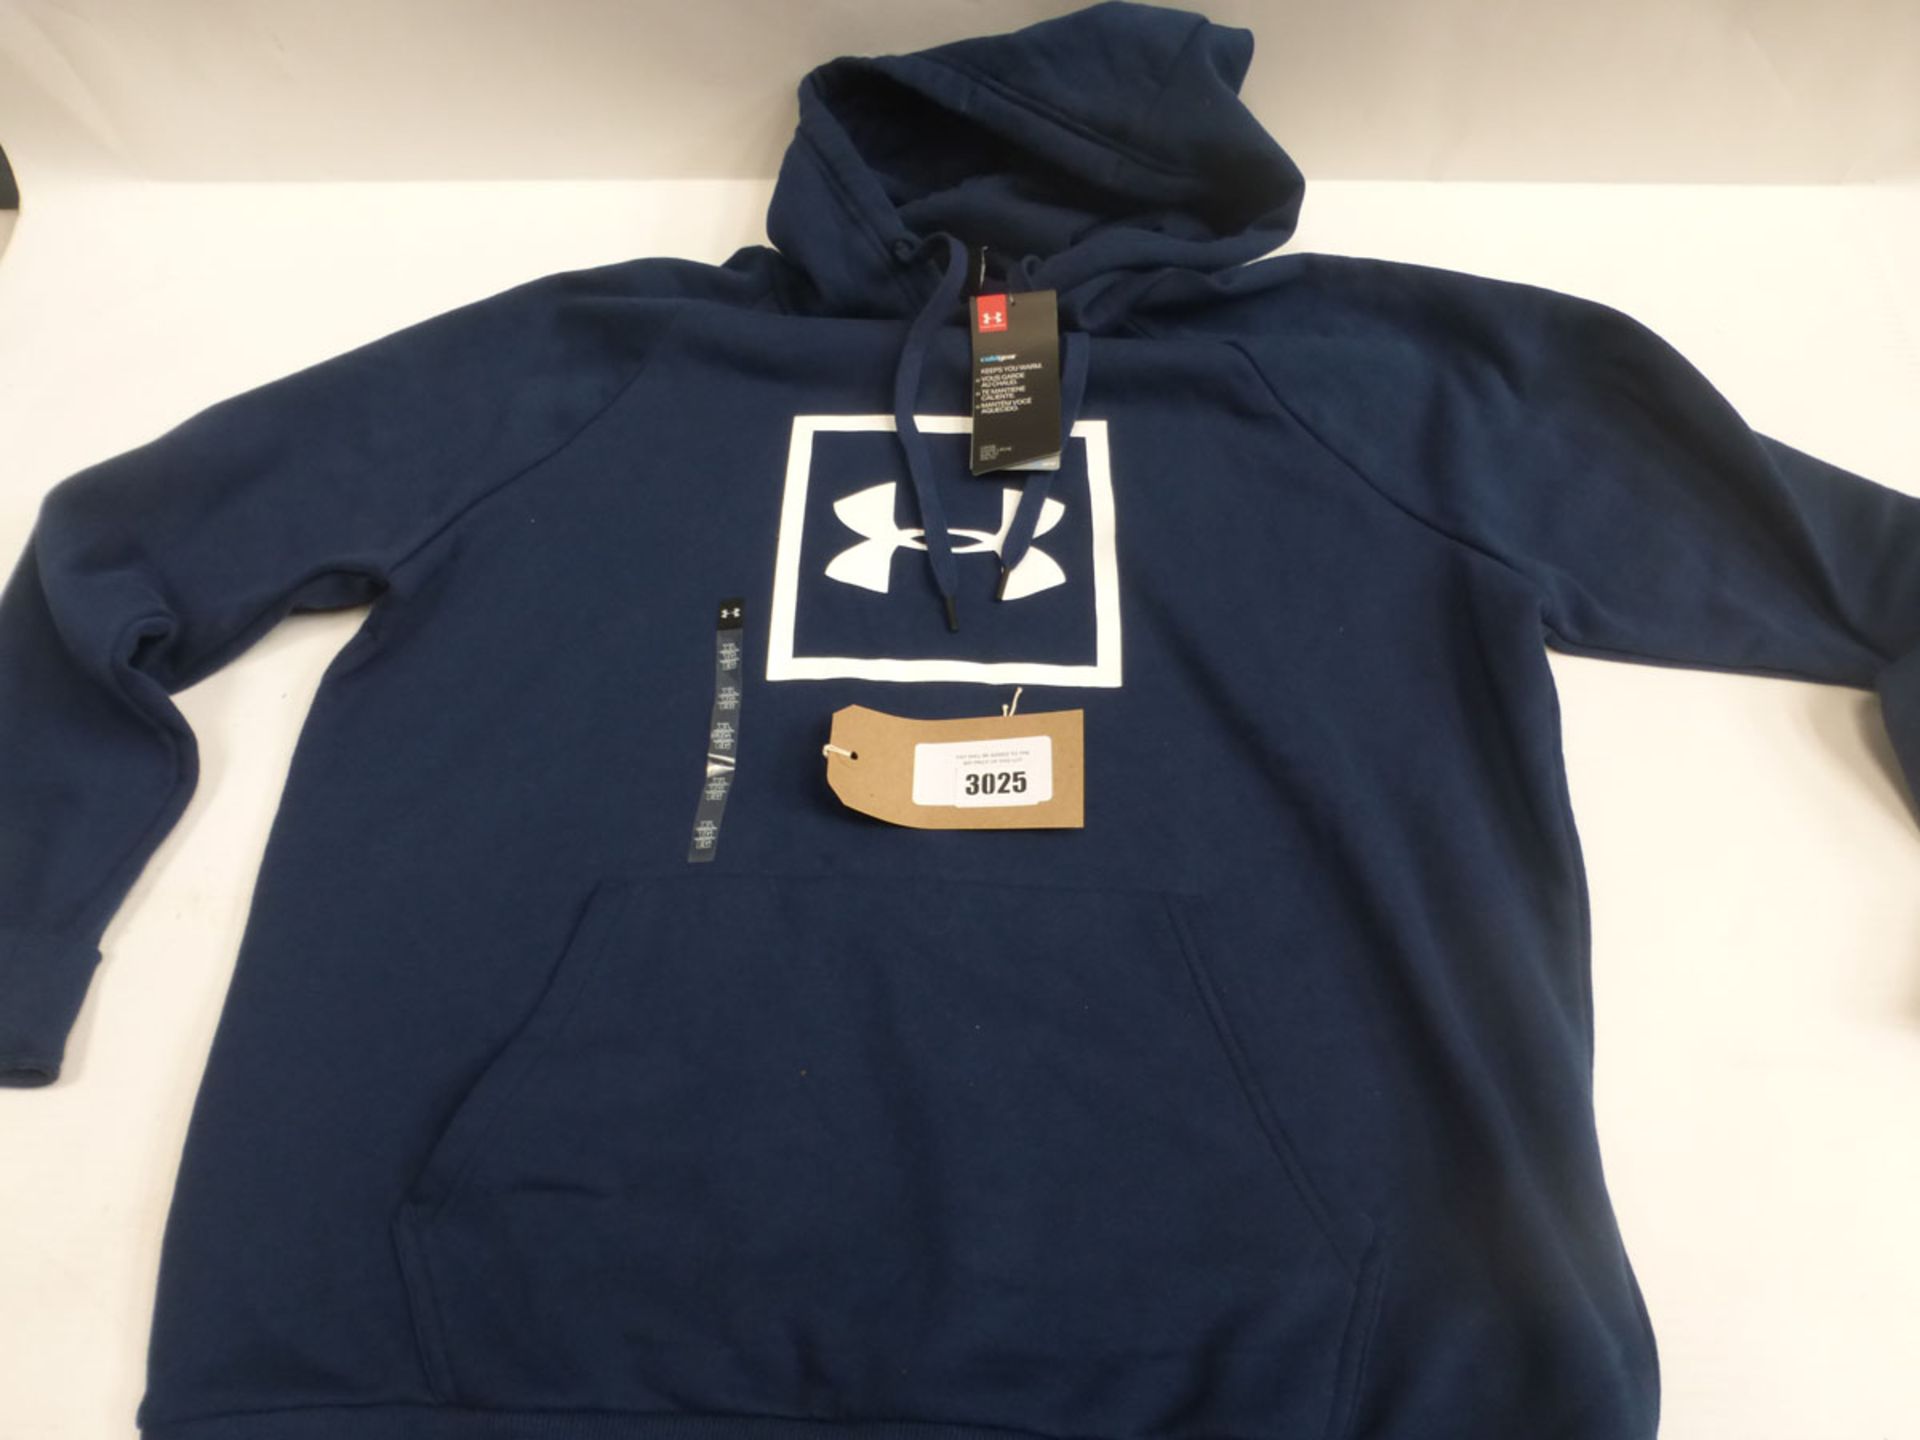 Gents Under Armour hoodie sized XL